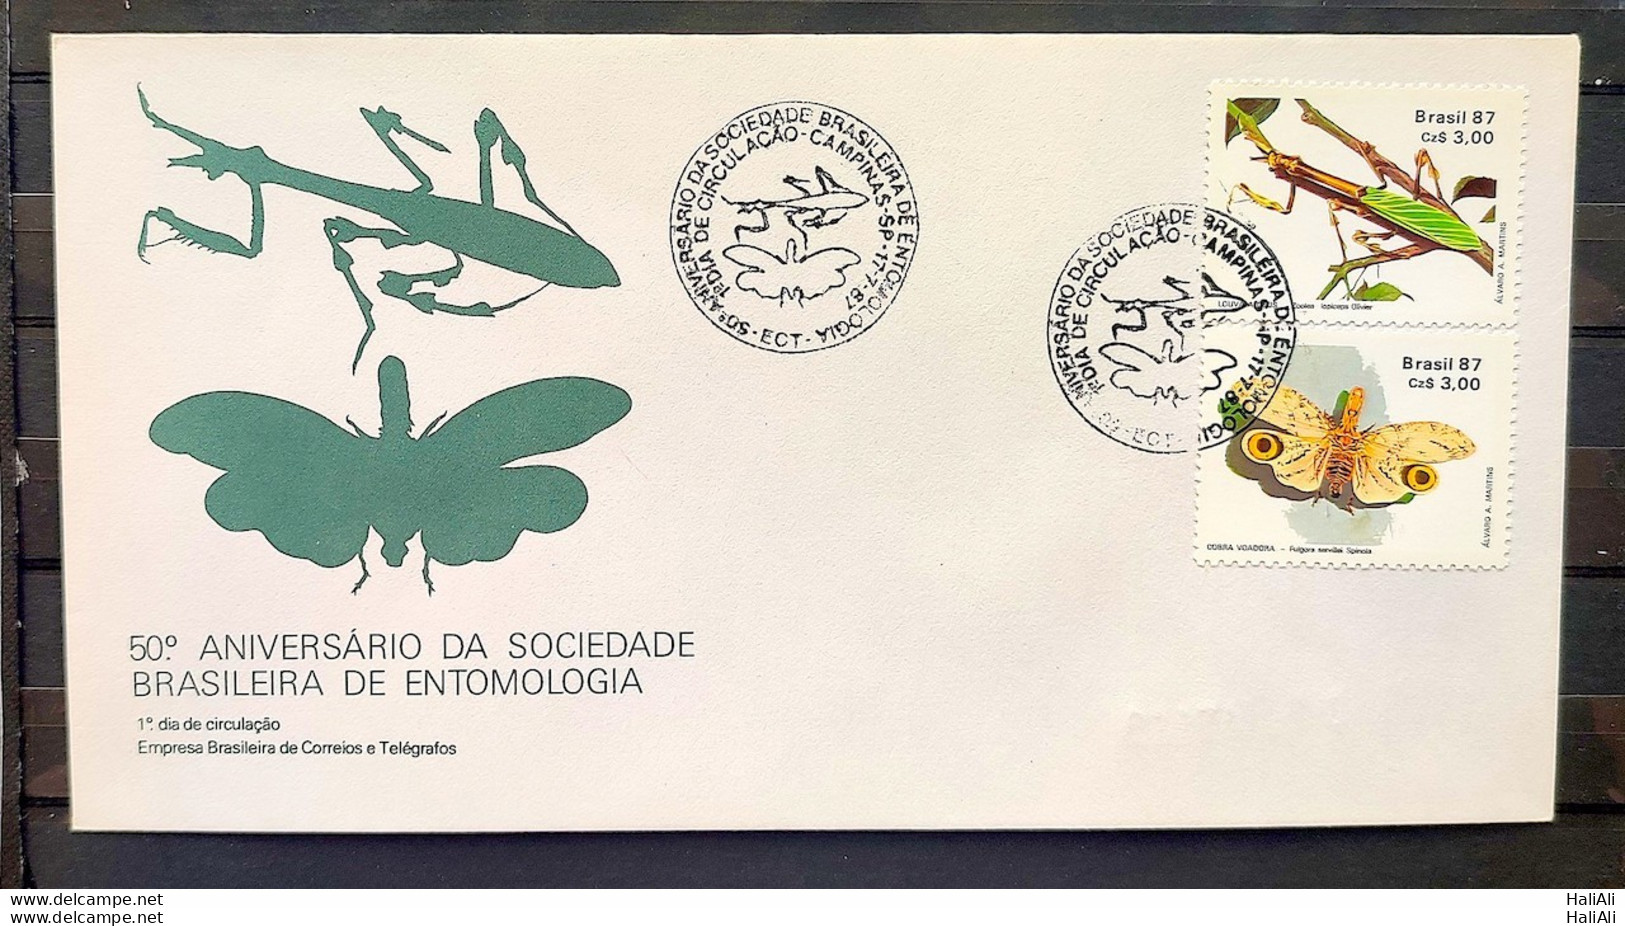 Brazil Envelope FDC 425 1987 Praise God Butterfly Insect CBC SP 1 - FDC